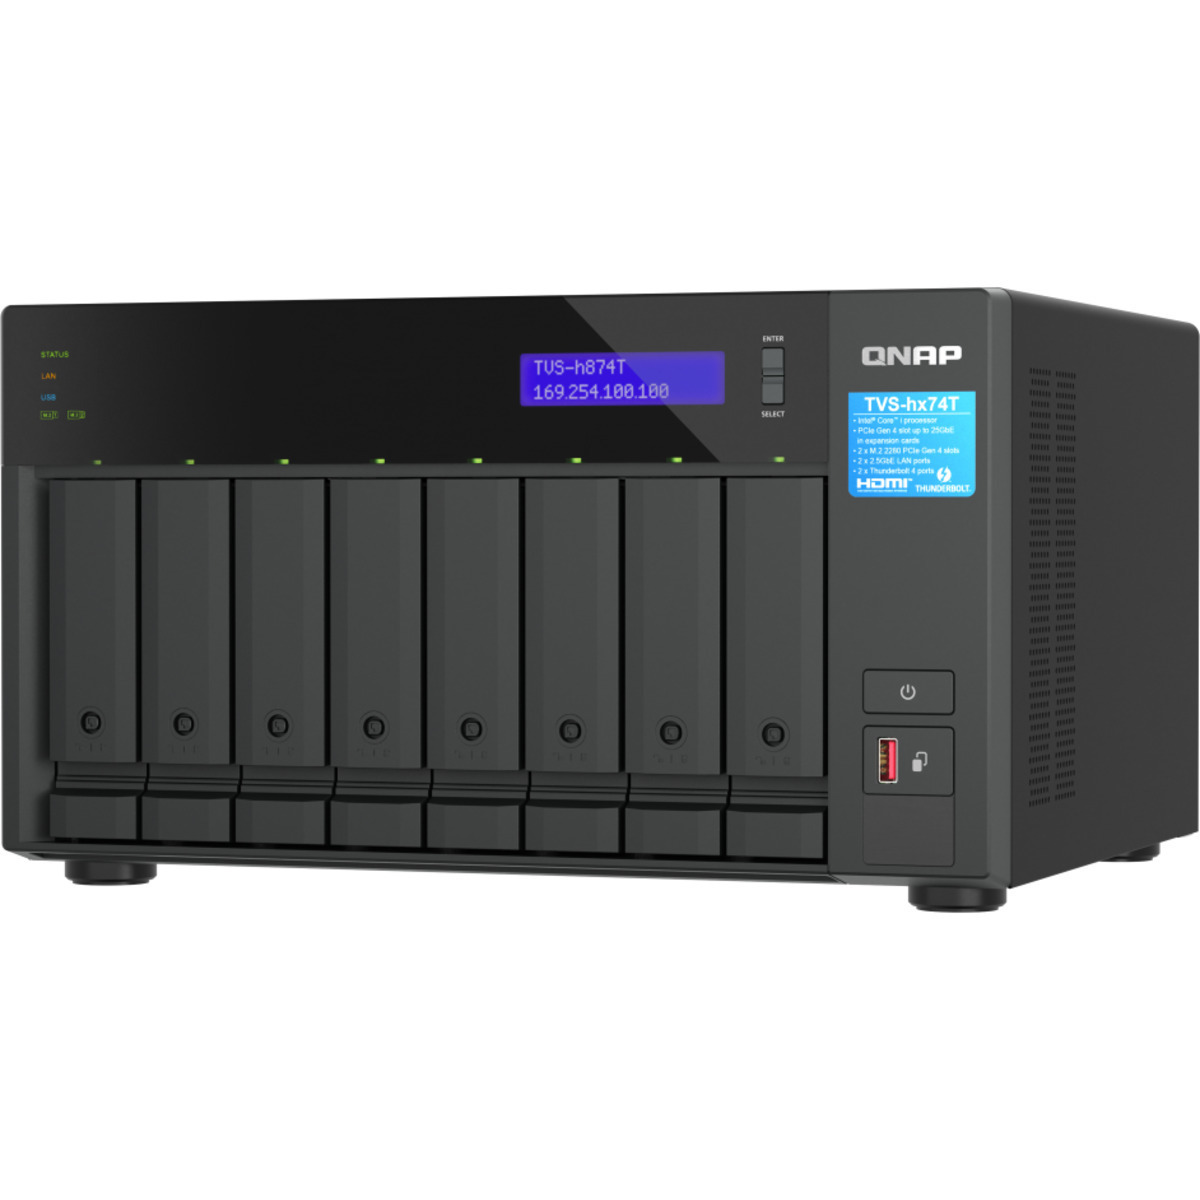 QNAP TVS-h874T Core i7 Thunderbolt 4 Desktop 8-Bay Multimedia / Power User / Business DAS-NAS - Combo Direct + Network Storage Device Burn-In Tested Configurations TVS-h874T Core i7 Thunderbolt 4